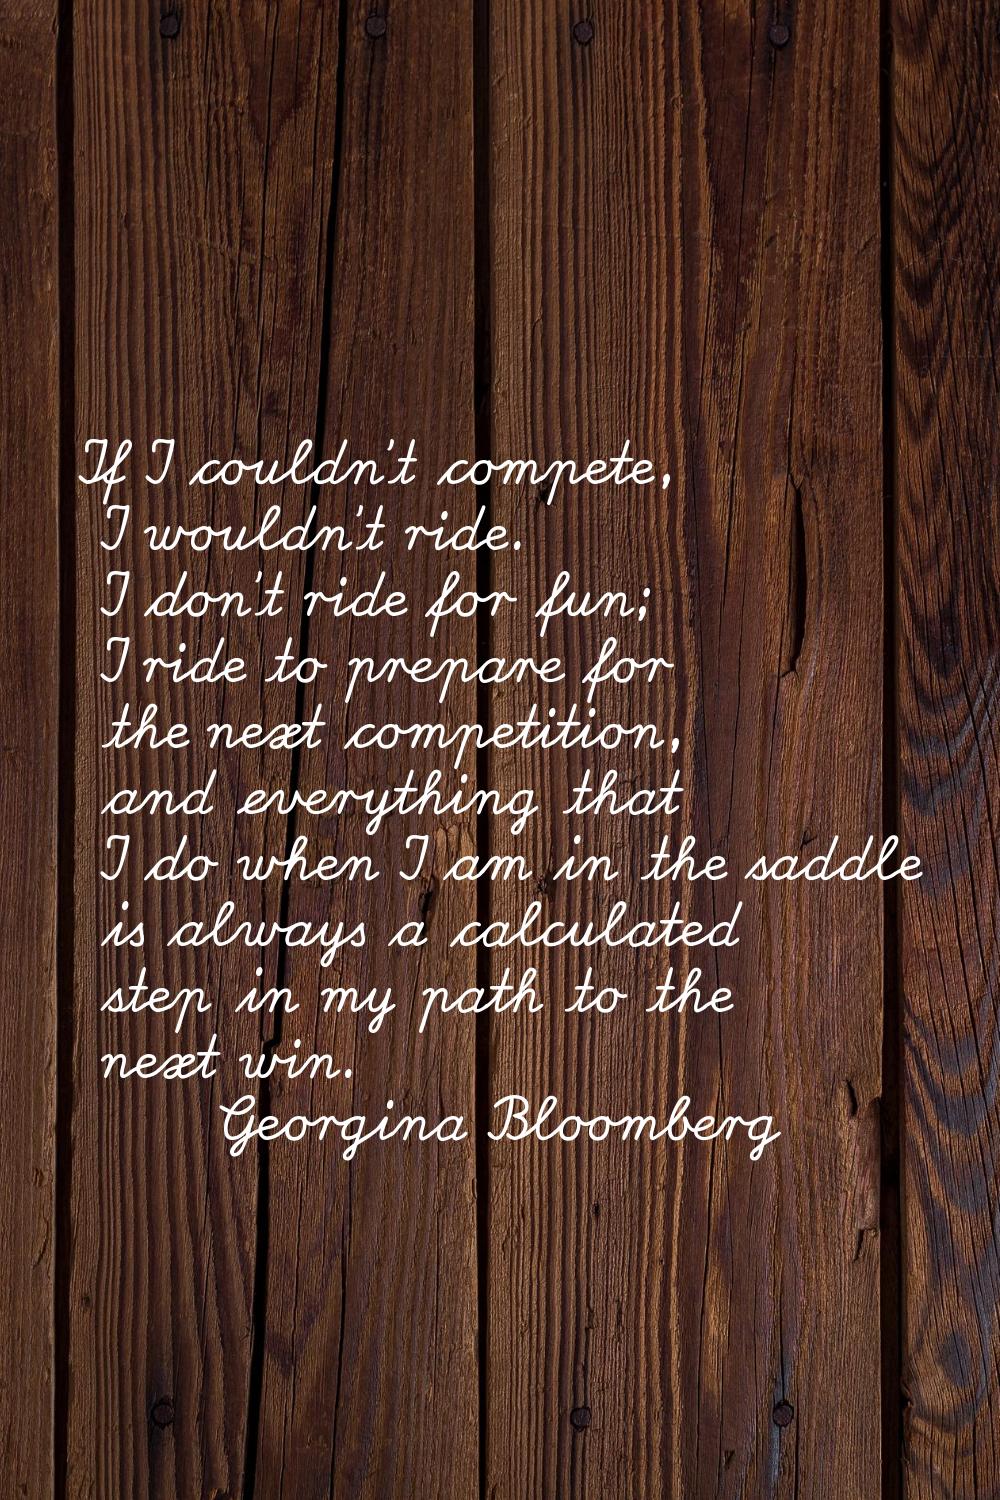 If I couldn't compete, I wouldn't ride. I don't ride for fun; I ride to prepare for the next compet